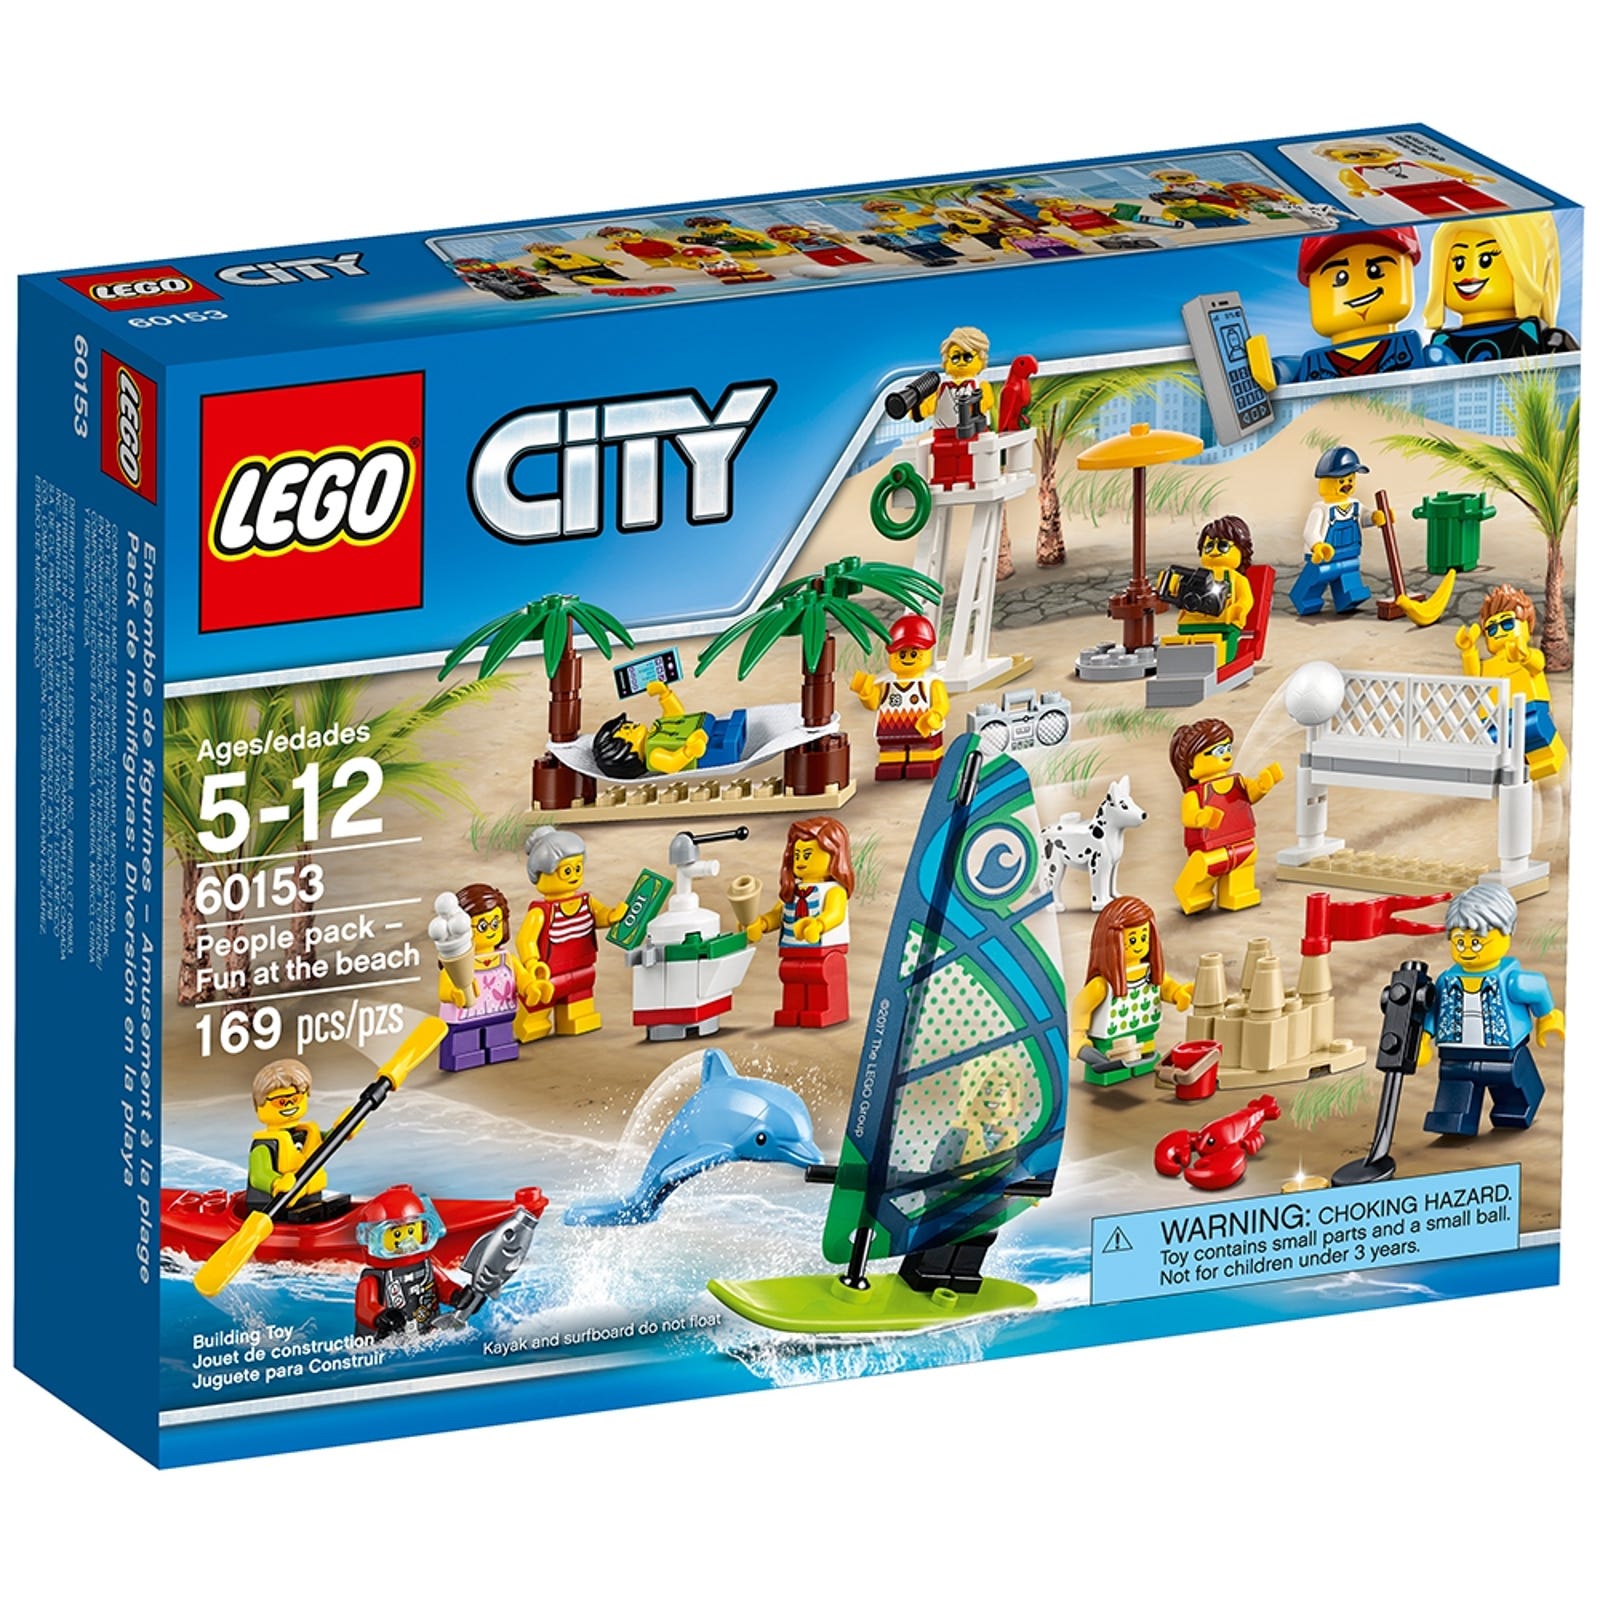 LEGO City: People Pack - Fun at the Beach 60153